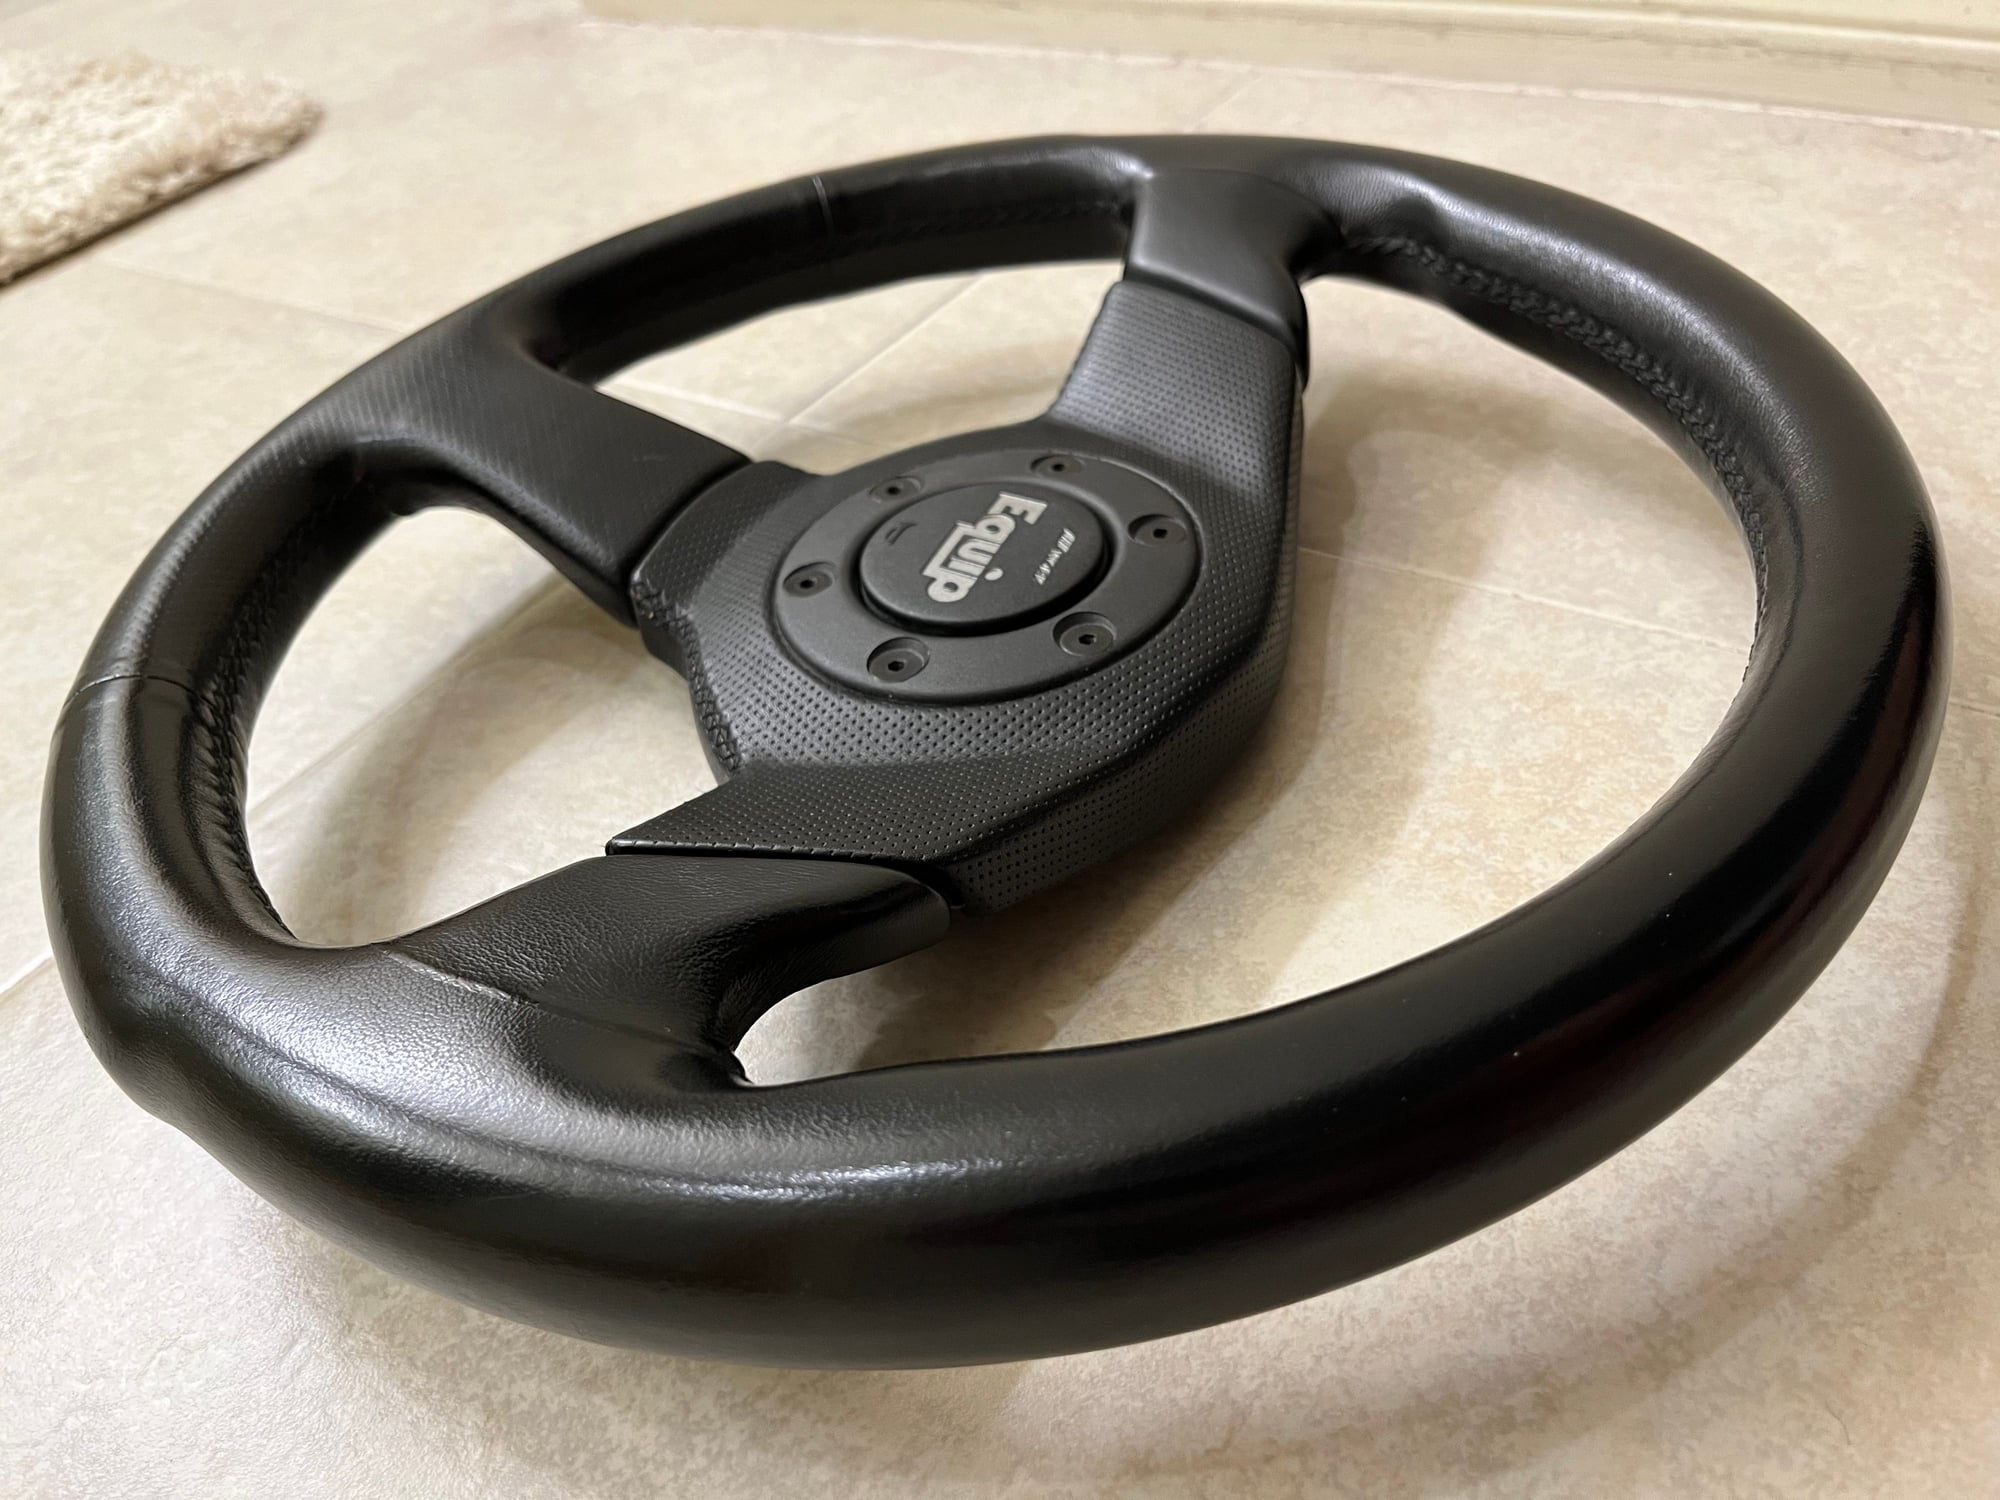 Interior/Upholstery - Perfect Rare Work Equip steering wheel - Used - 0  All Models - Gardena, CA 90247, United States